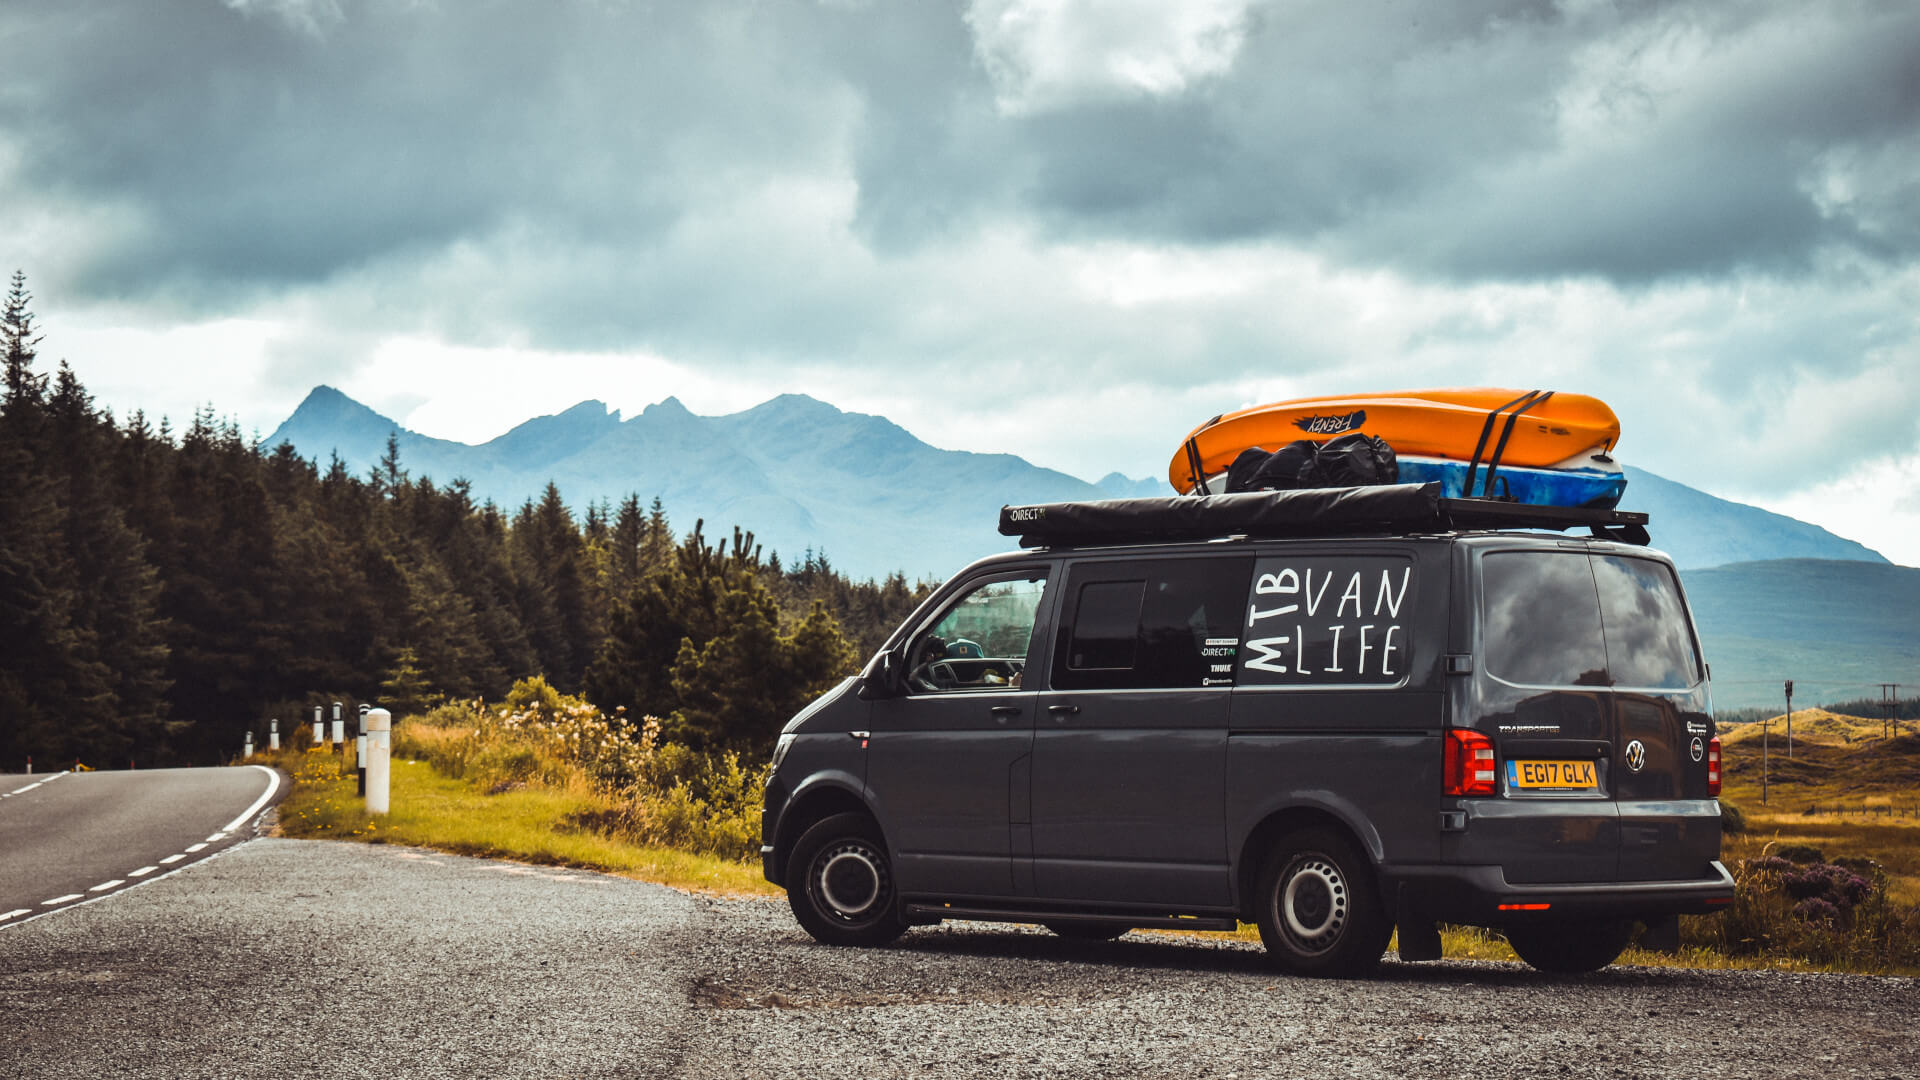 Direct4x4 hot and popular products collection image with photo of VW Volkswagen Transporter T5 and T6 kitted out in expedition camping gear in the mountains.